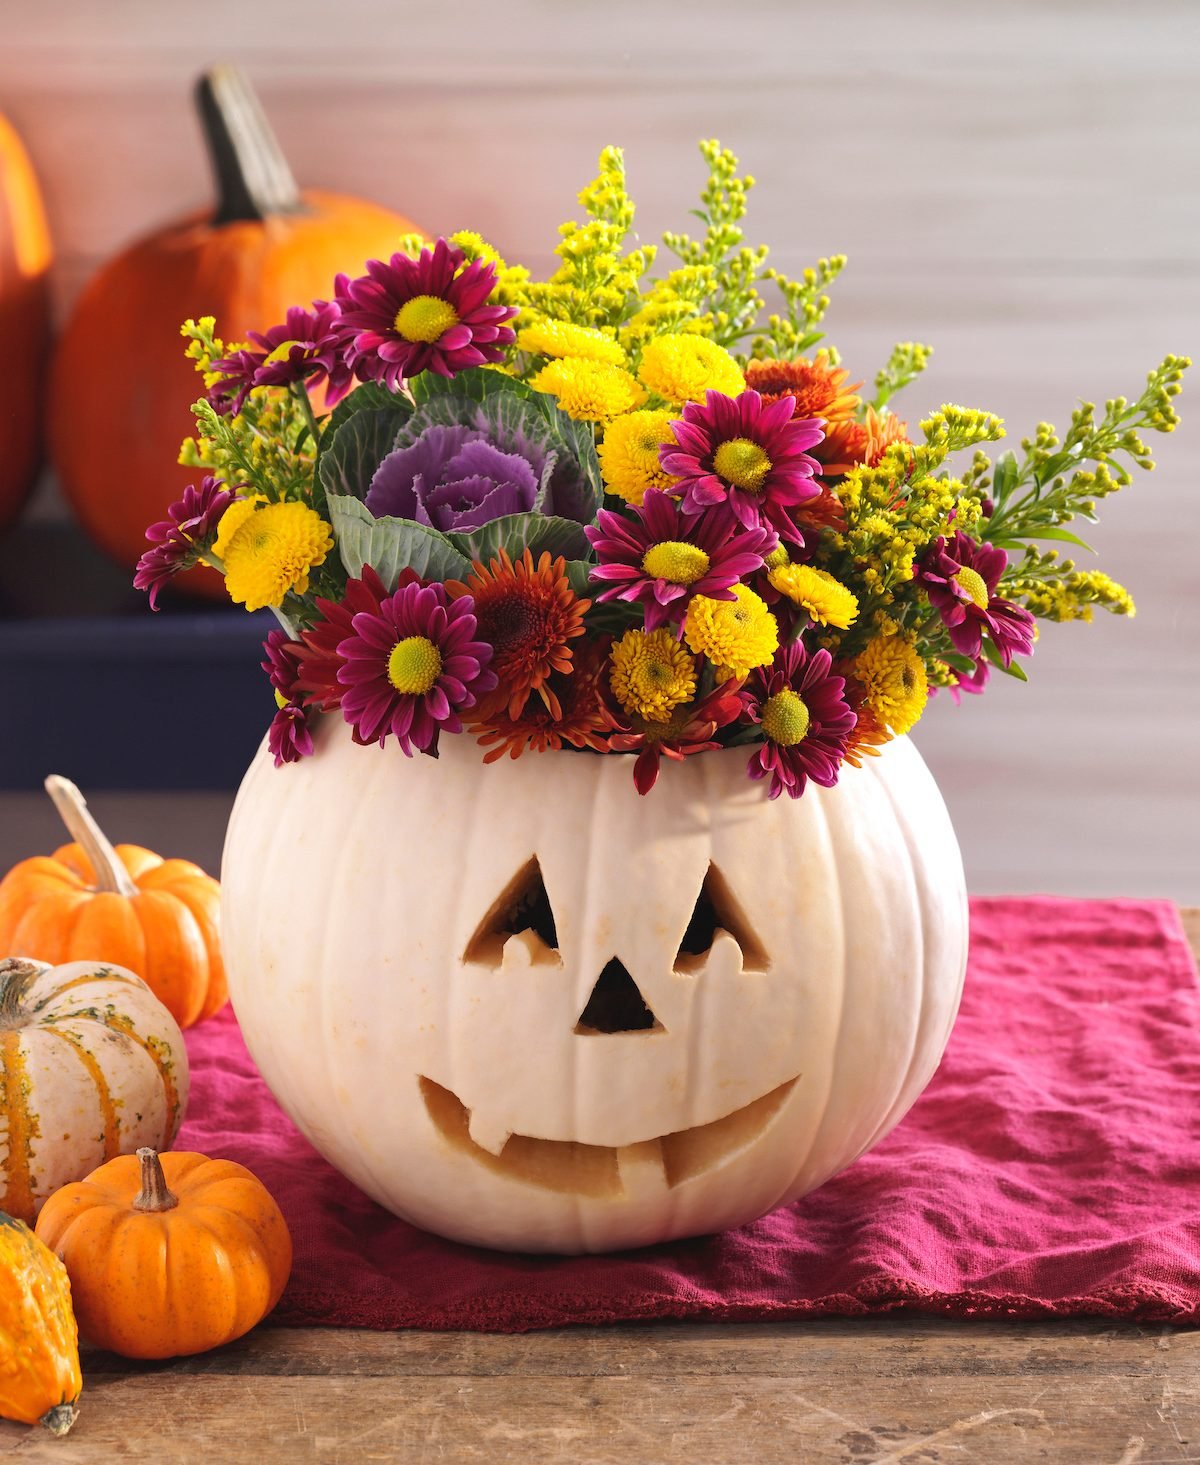 Fall Decorating: Fill a Pumpkin With Flowers